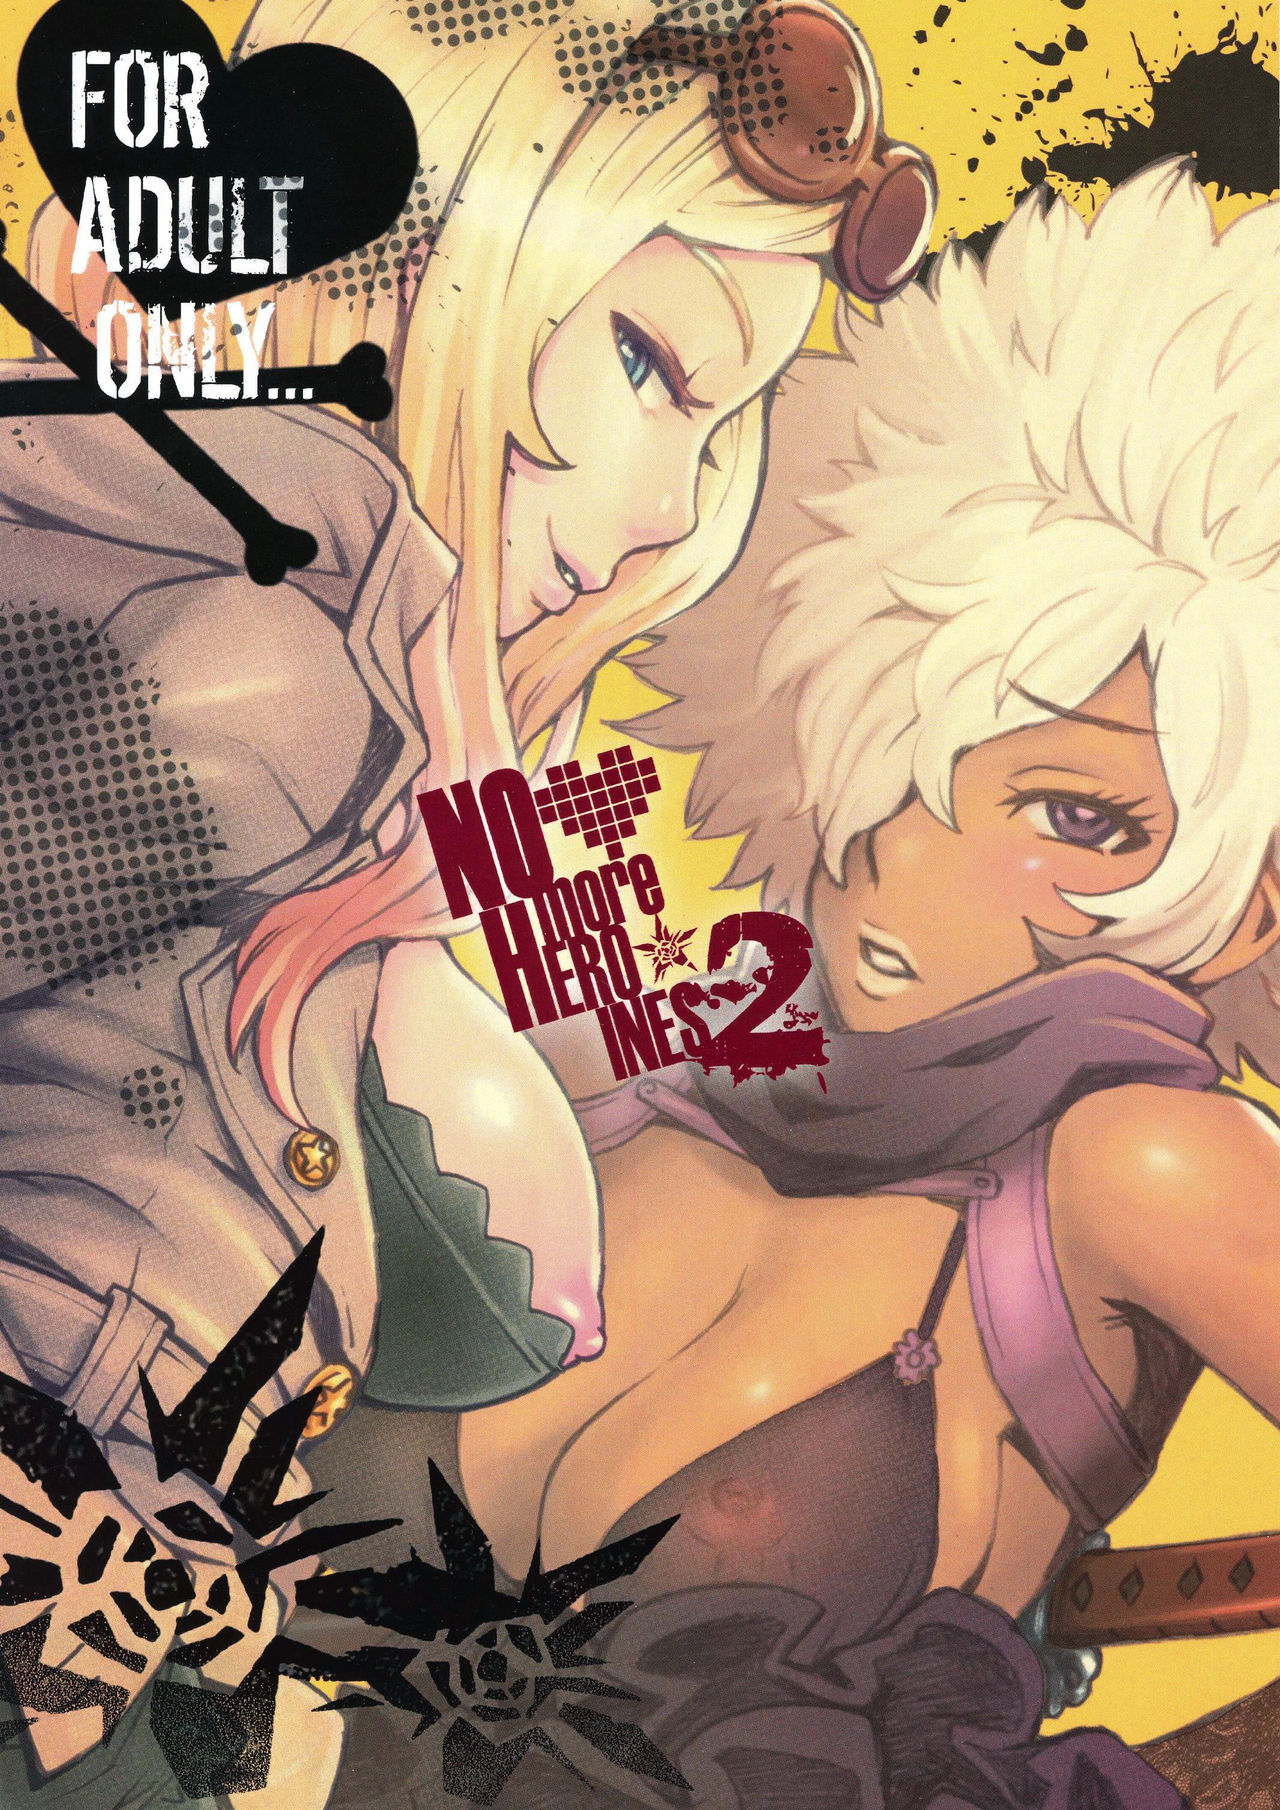 (C79) [Eight Beat (Itou Eight)] NO MORE HEROINES 2 (NO MORE HEROES) [Chinese] [黑条汉化] (C79) [エイトビート (伊藤エイト)] NO MORE HEROINES 2 (ノーモア★ヒーローズ) [中文翻譯]